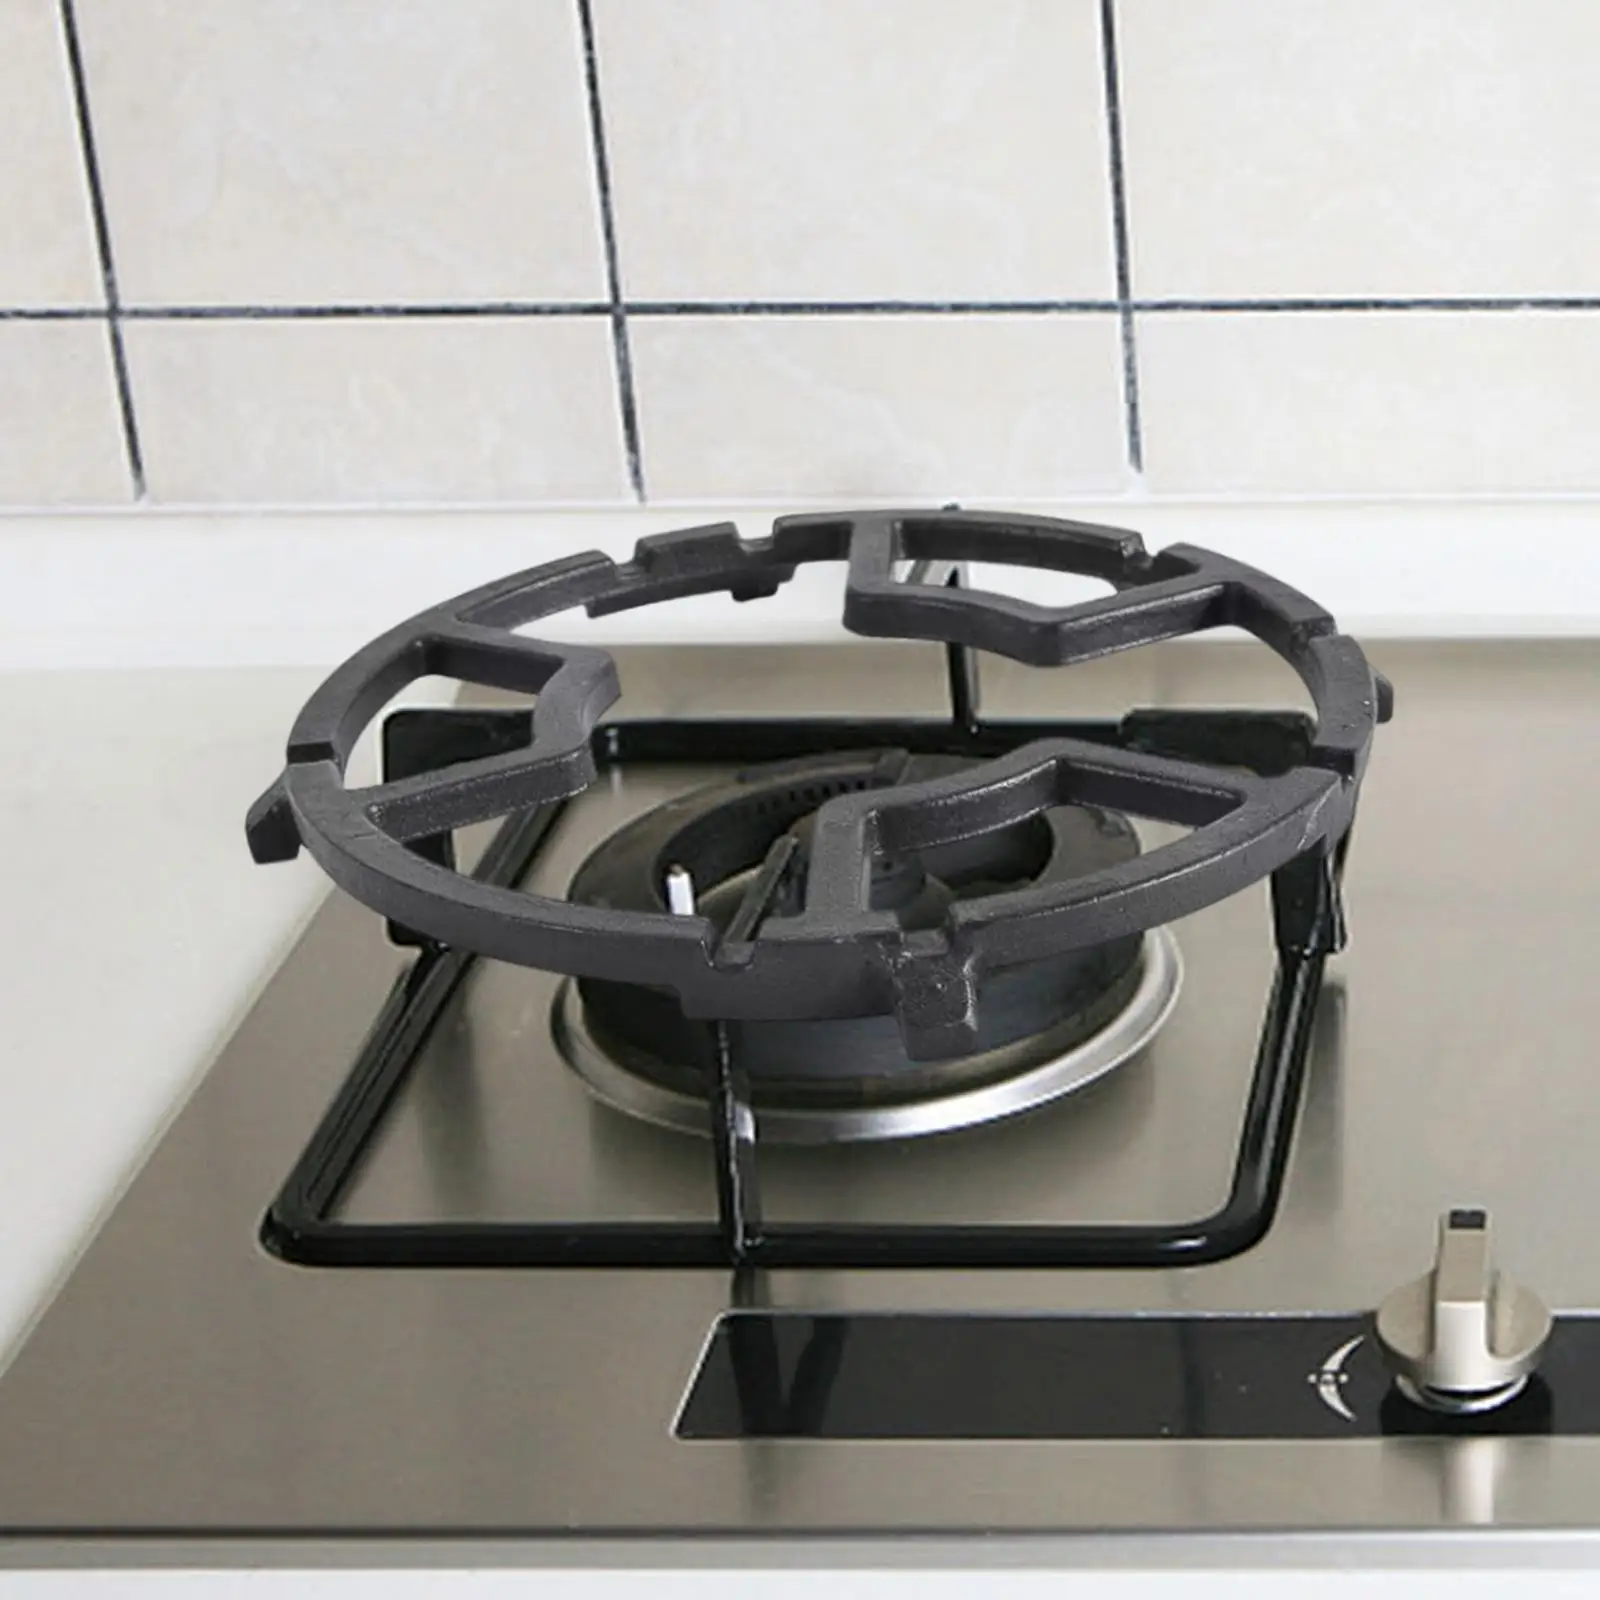 Gas Rings Reducer Trivets Top Wok Rack Rings Durable Wok Stand Rack for Camping Tea Kettles Restaurant Kitchen Sauce Pans